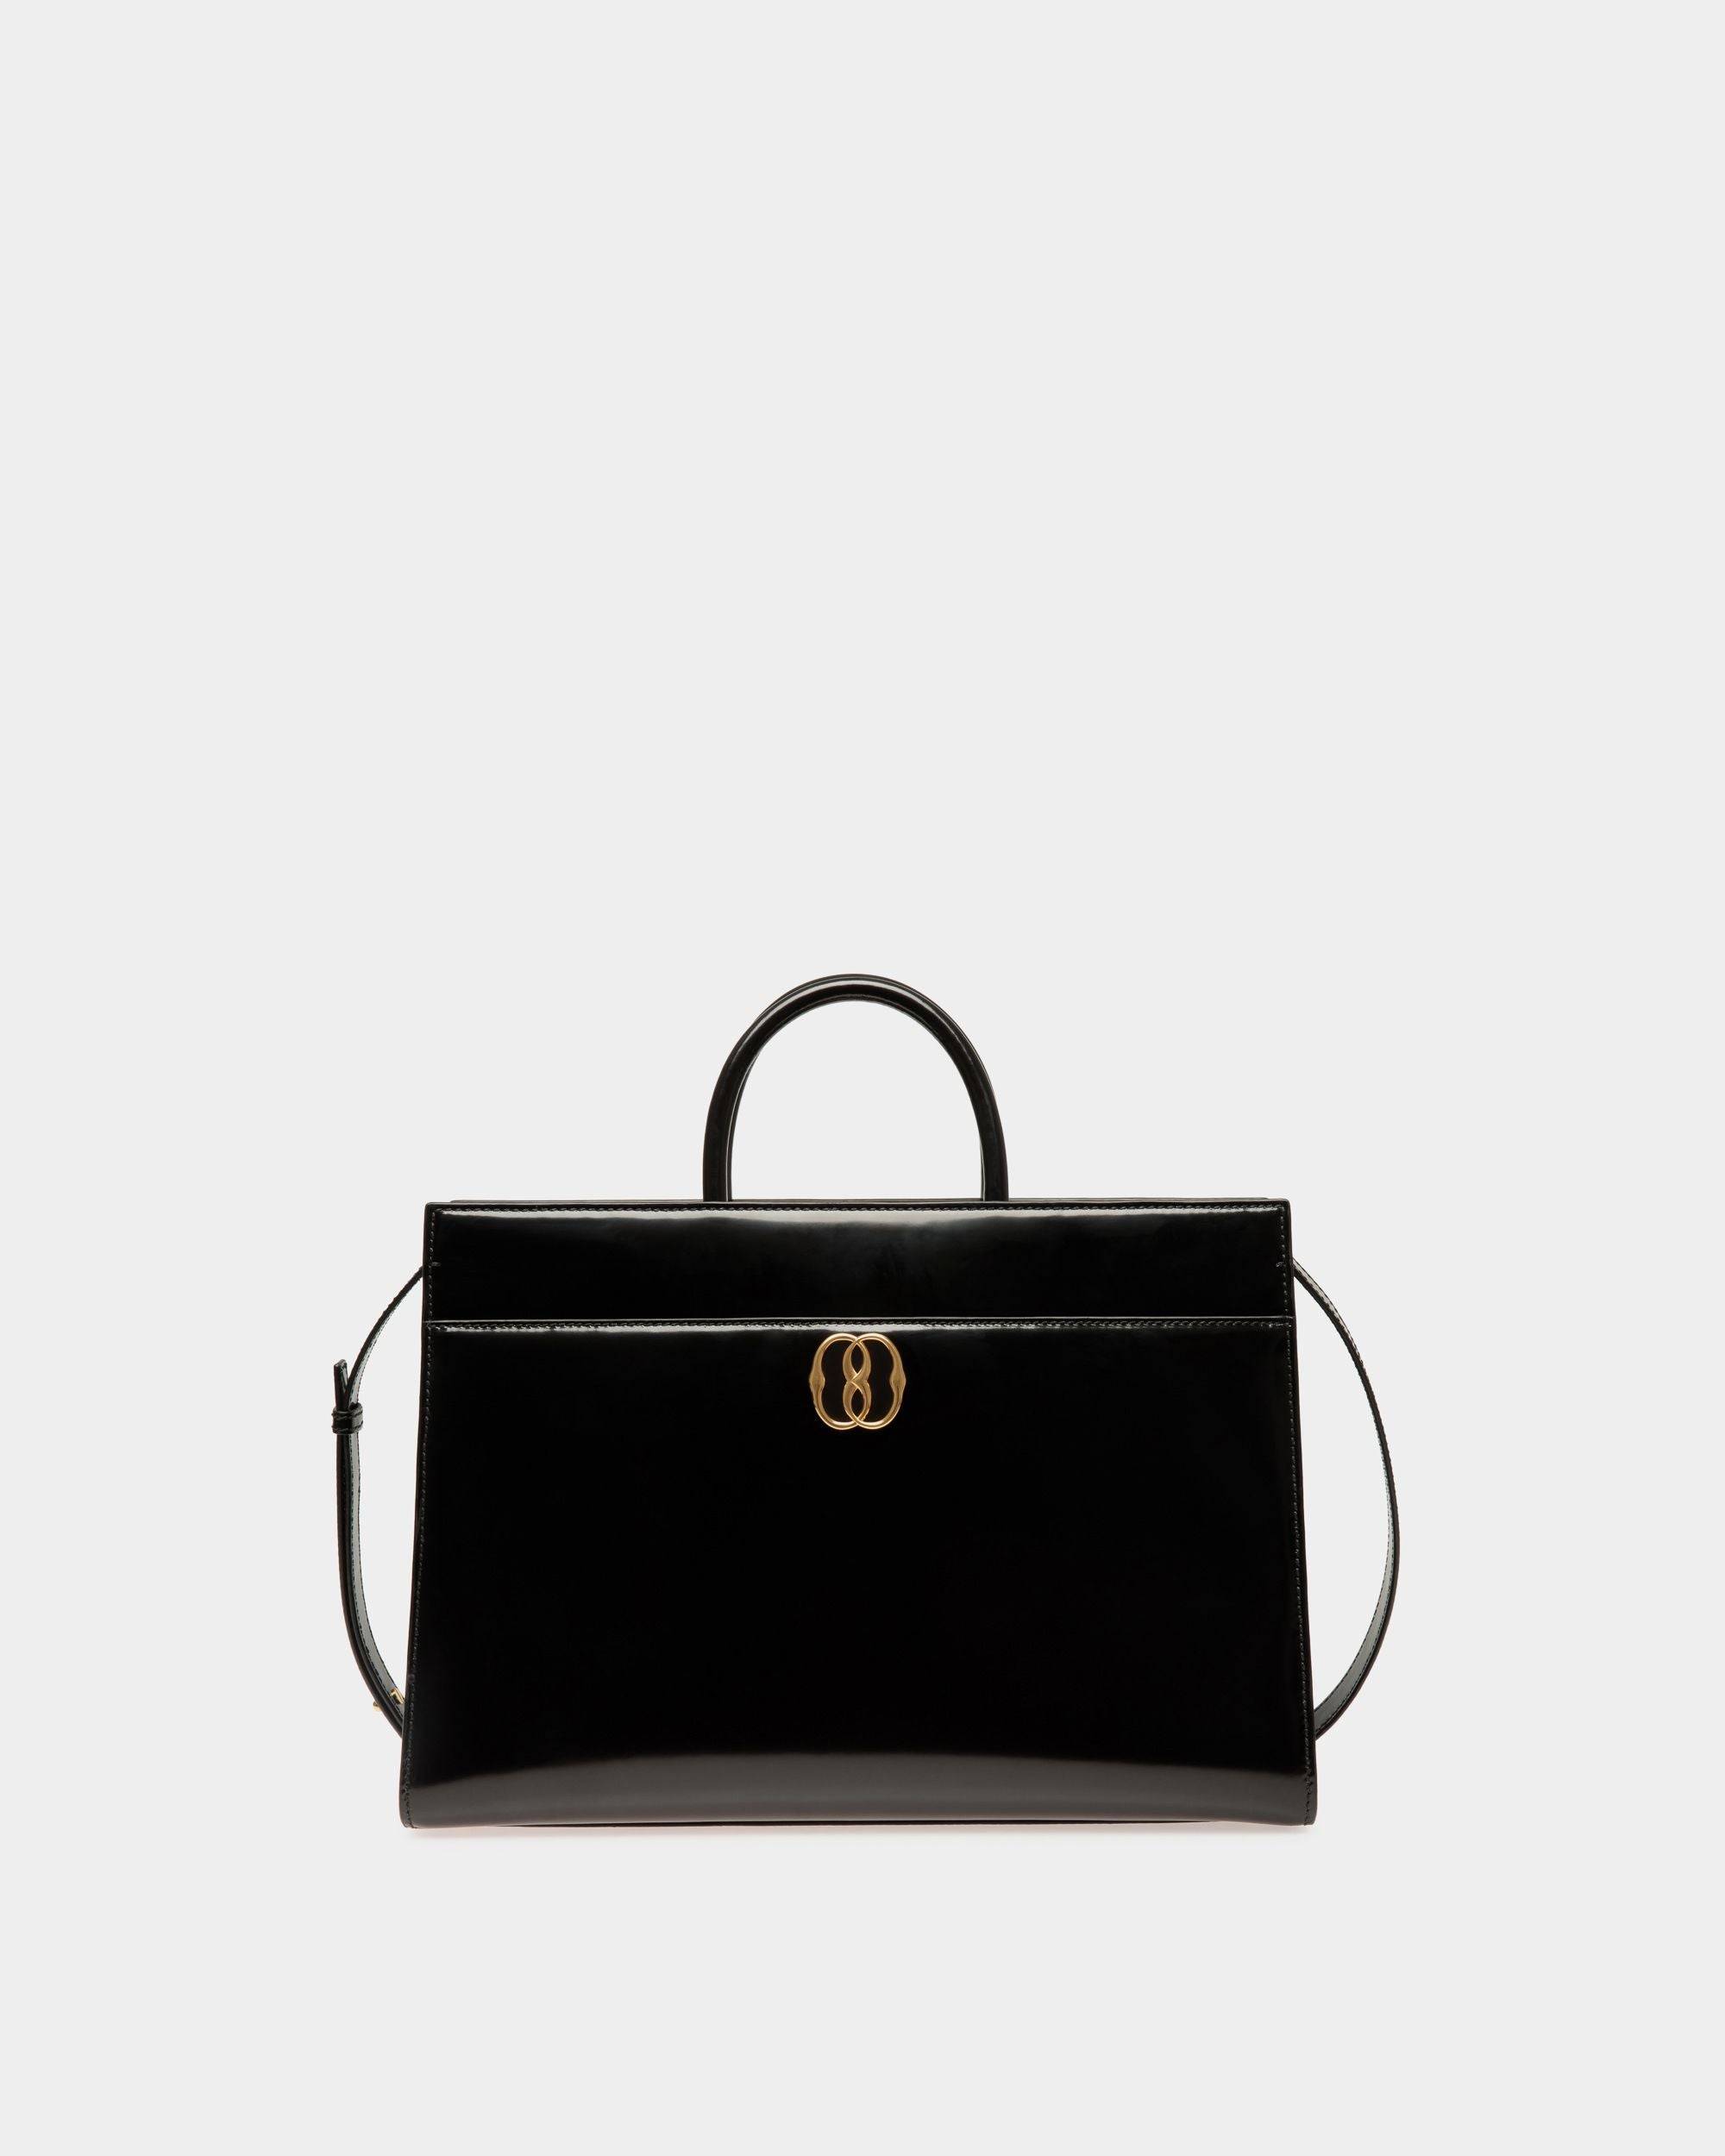 Emblem | Women's Tote Bag in Black Brushed Leather | Bally | Still Life Front